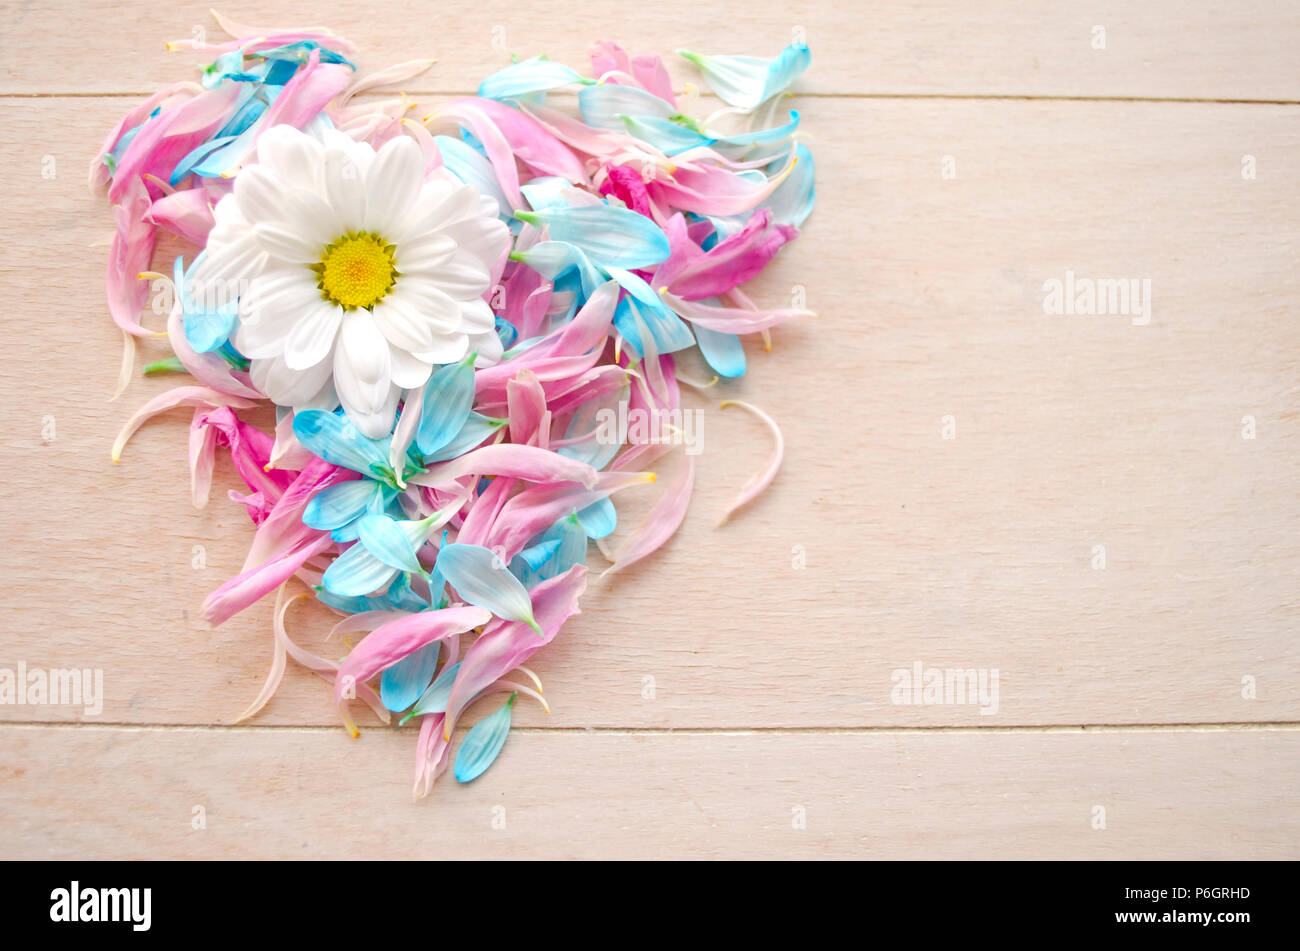 Love symbol on wooden background maid by blue and pink petals with daisy flower. Stock Photo